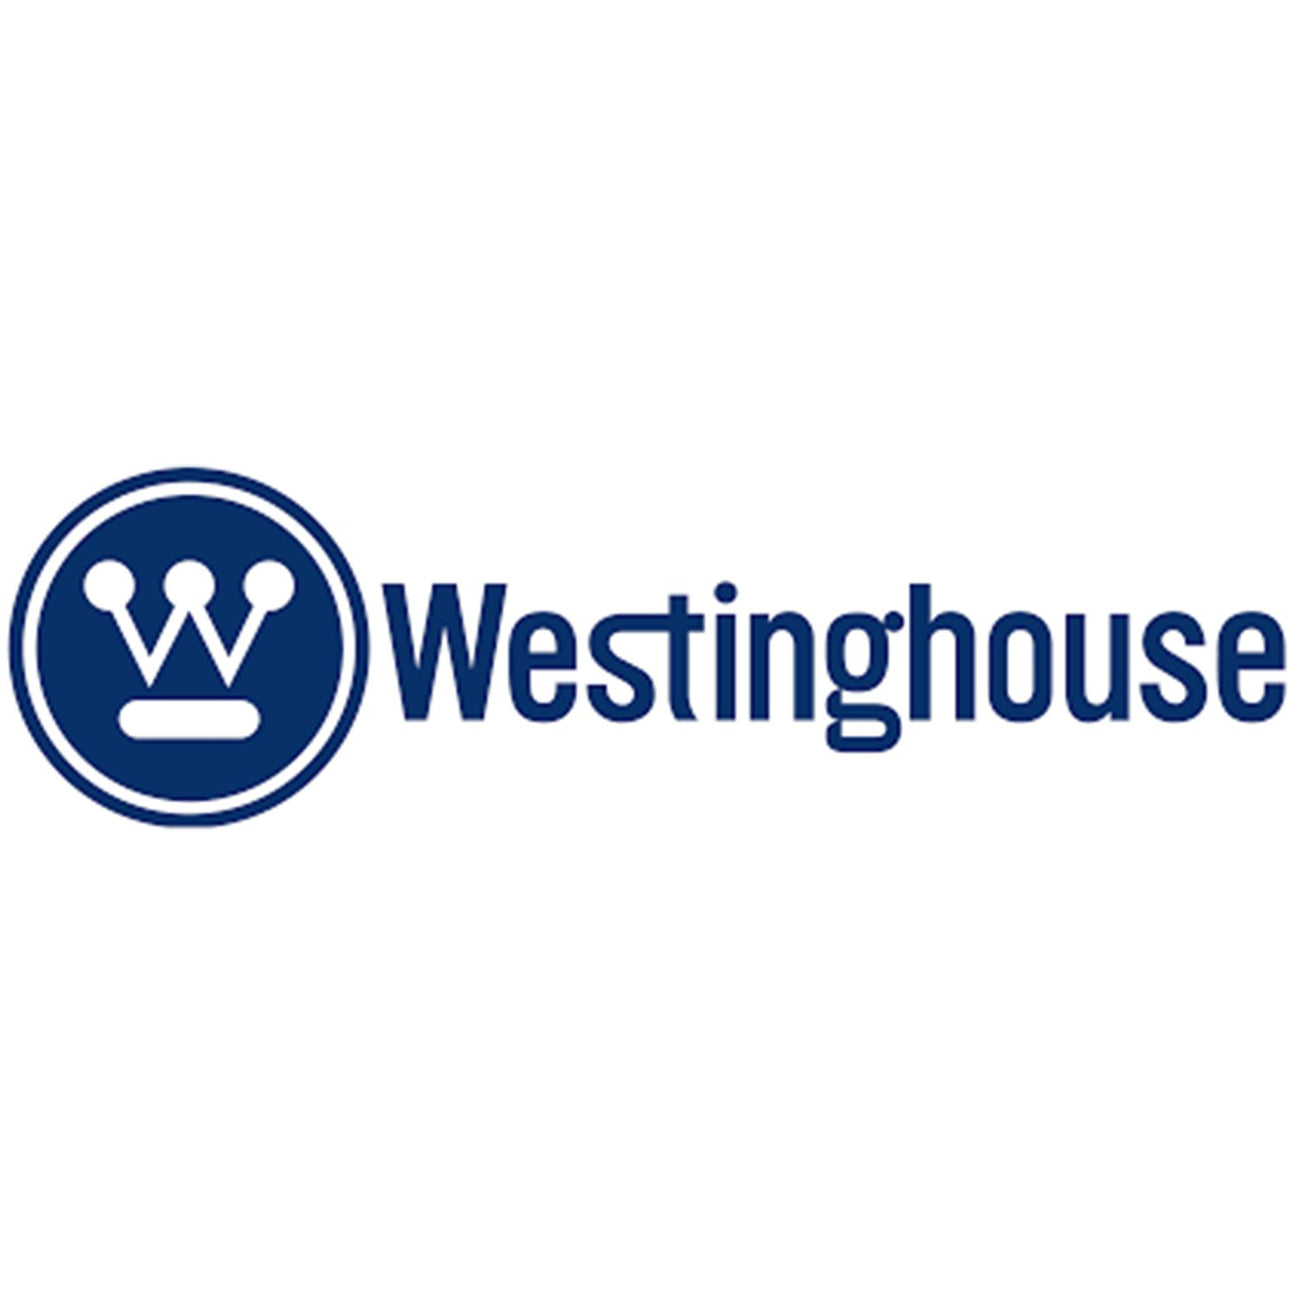 Westinghouse Cooktop & Oven Parts - My Oven Spares